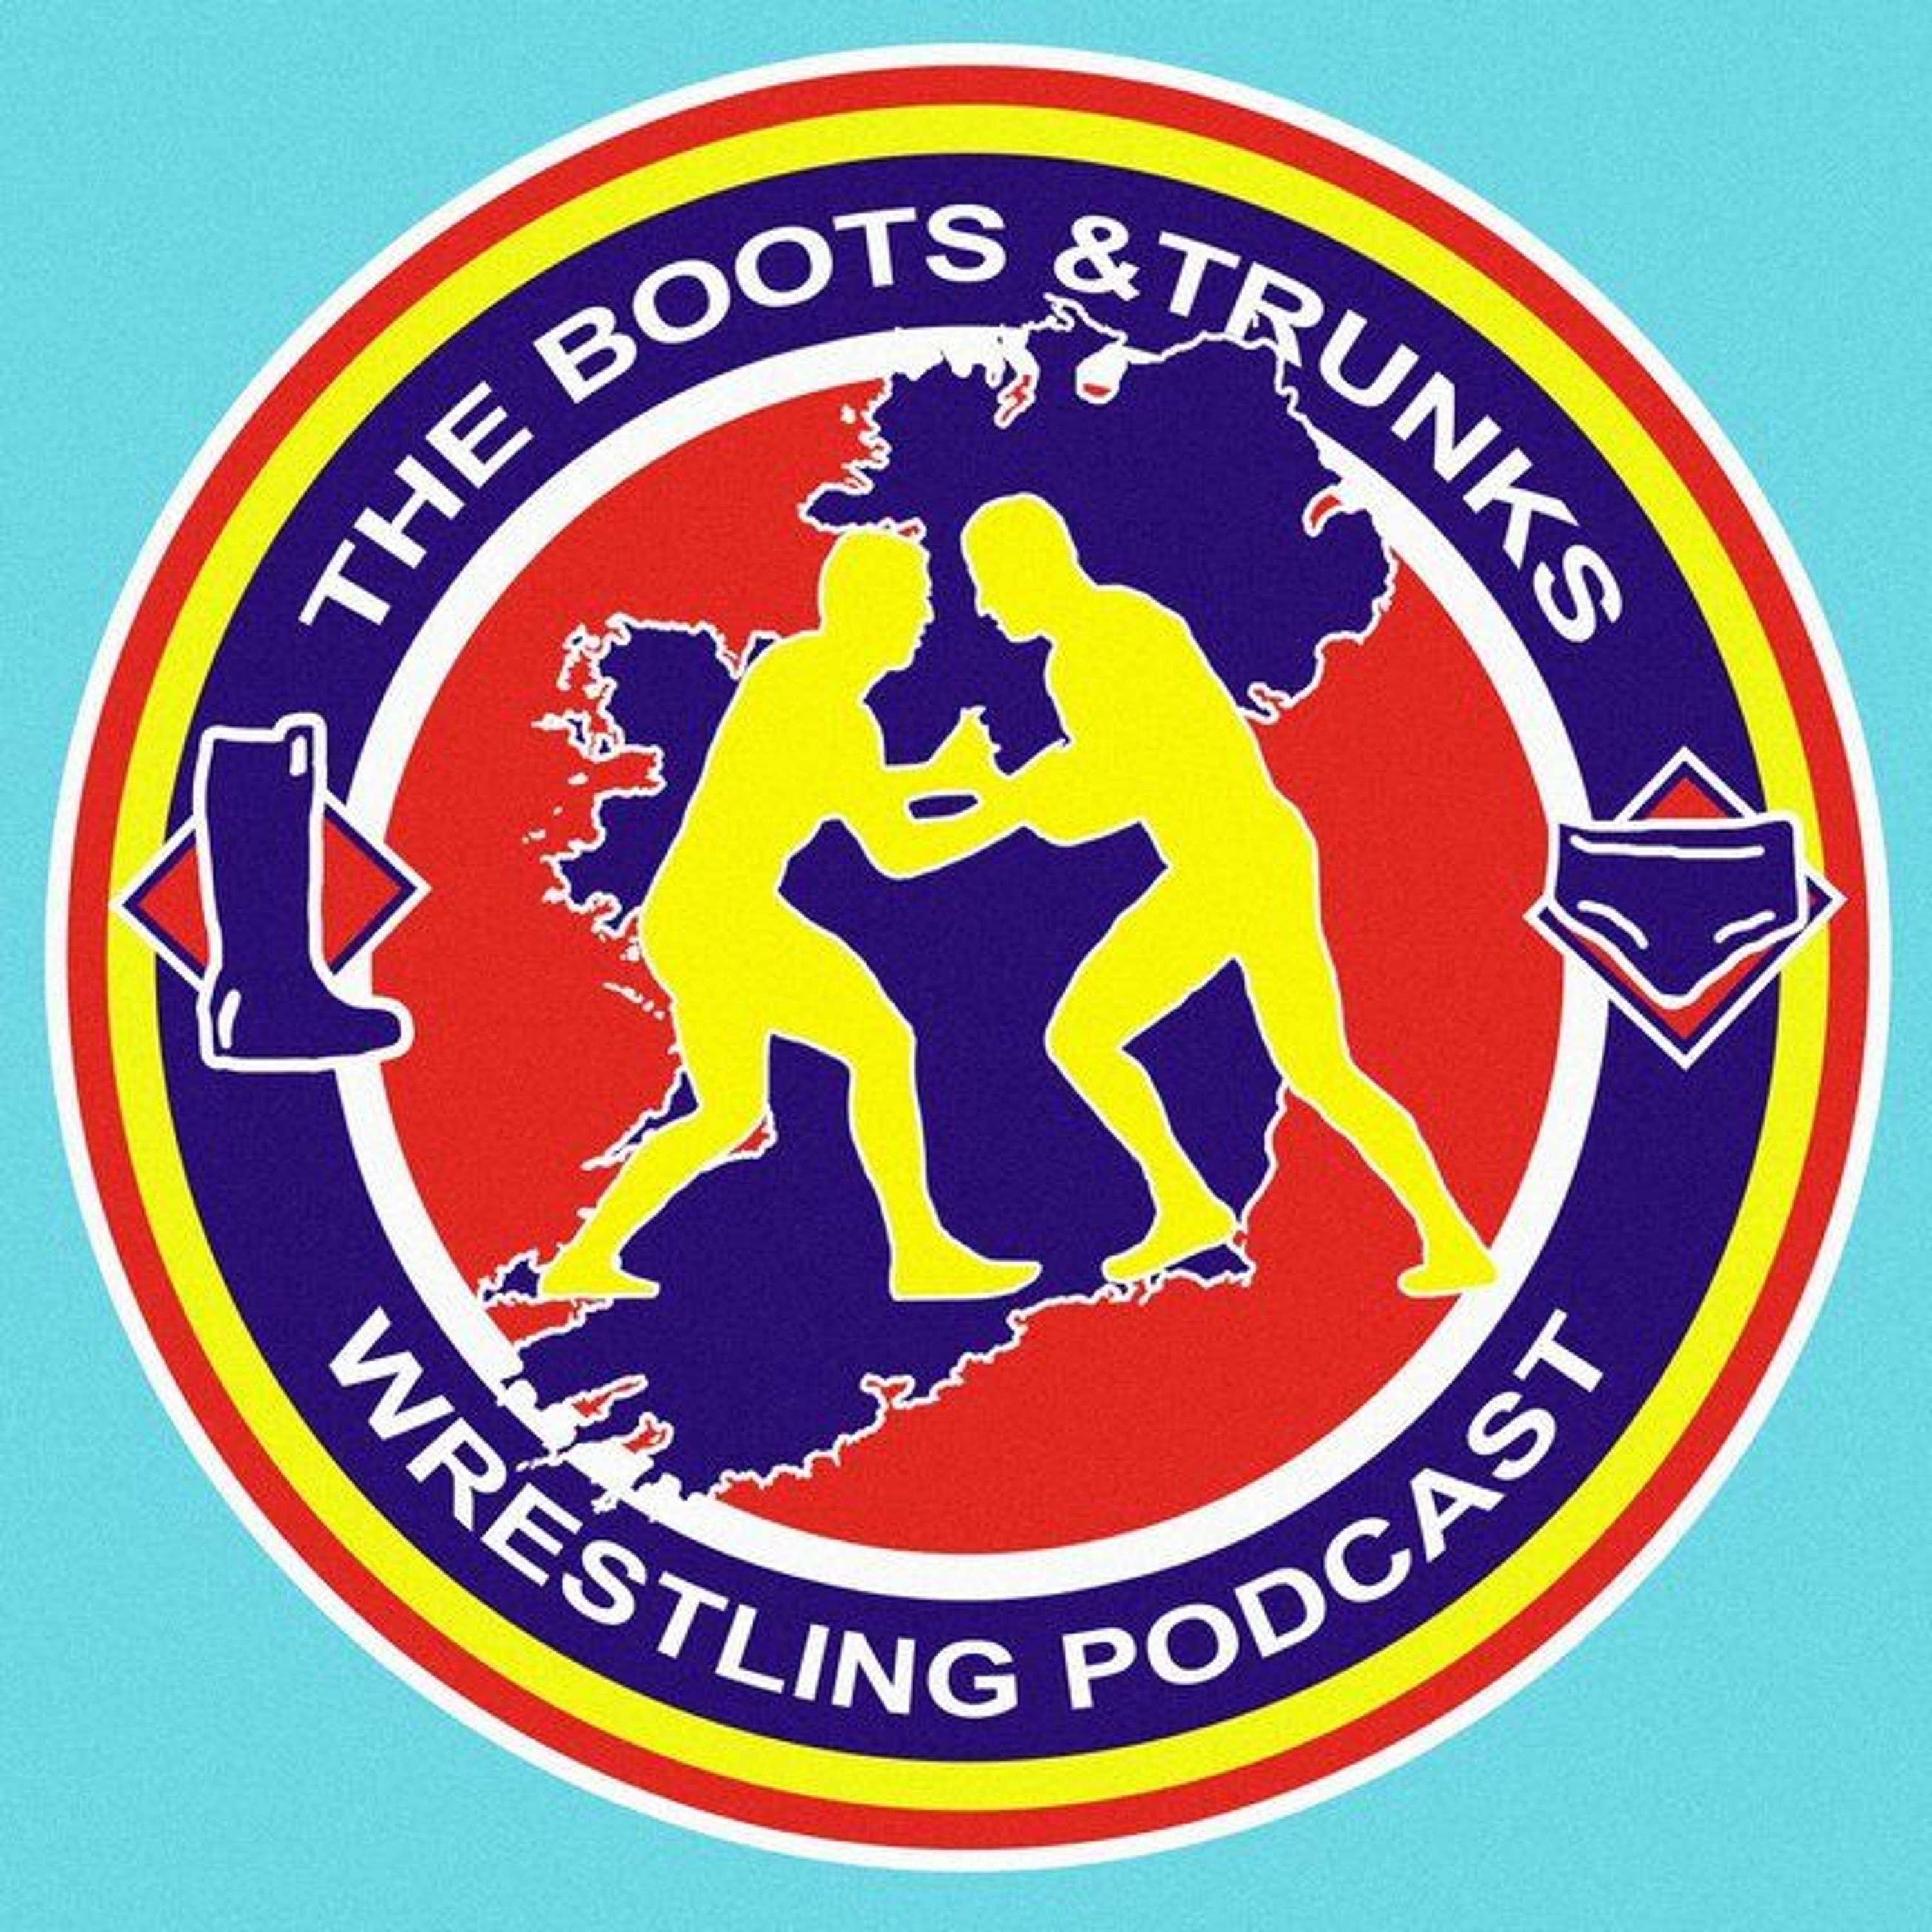 Boots and Trunks Podcast: Episode 3 - The Fox Guards the Henhouse